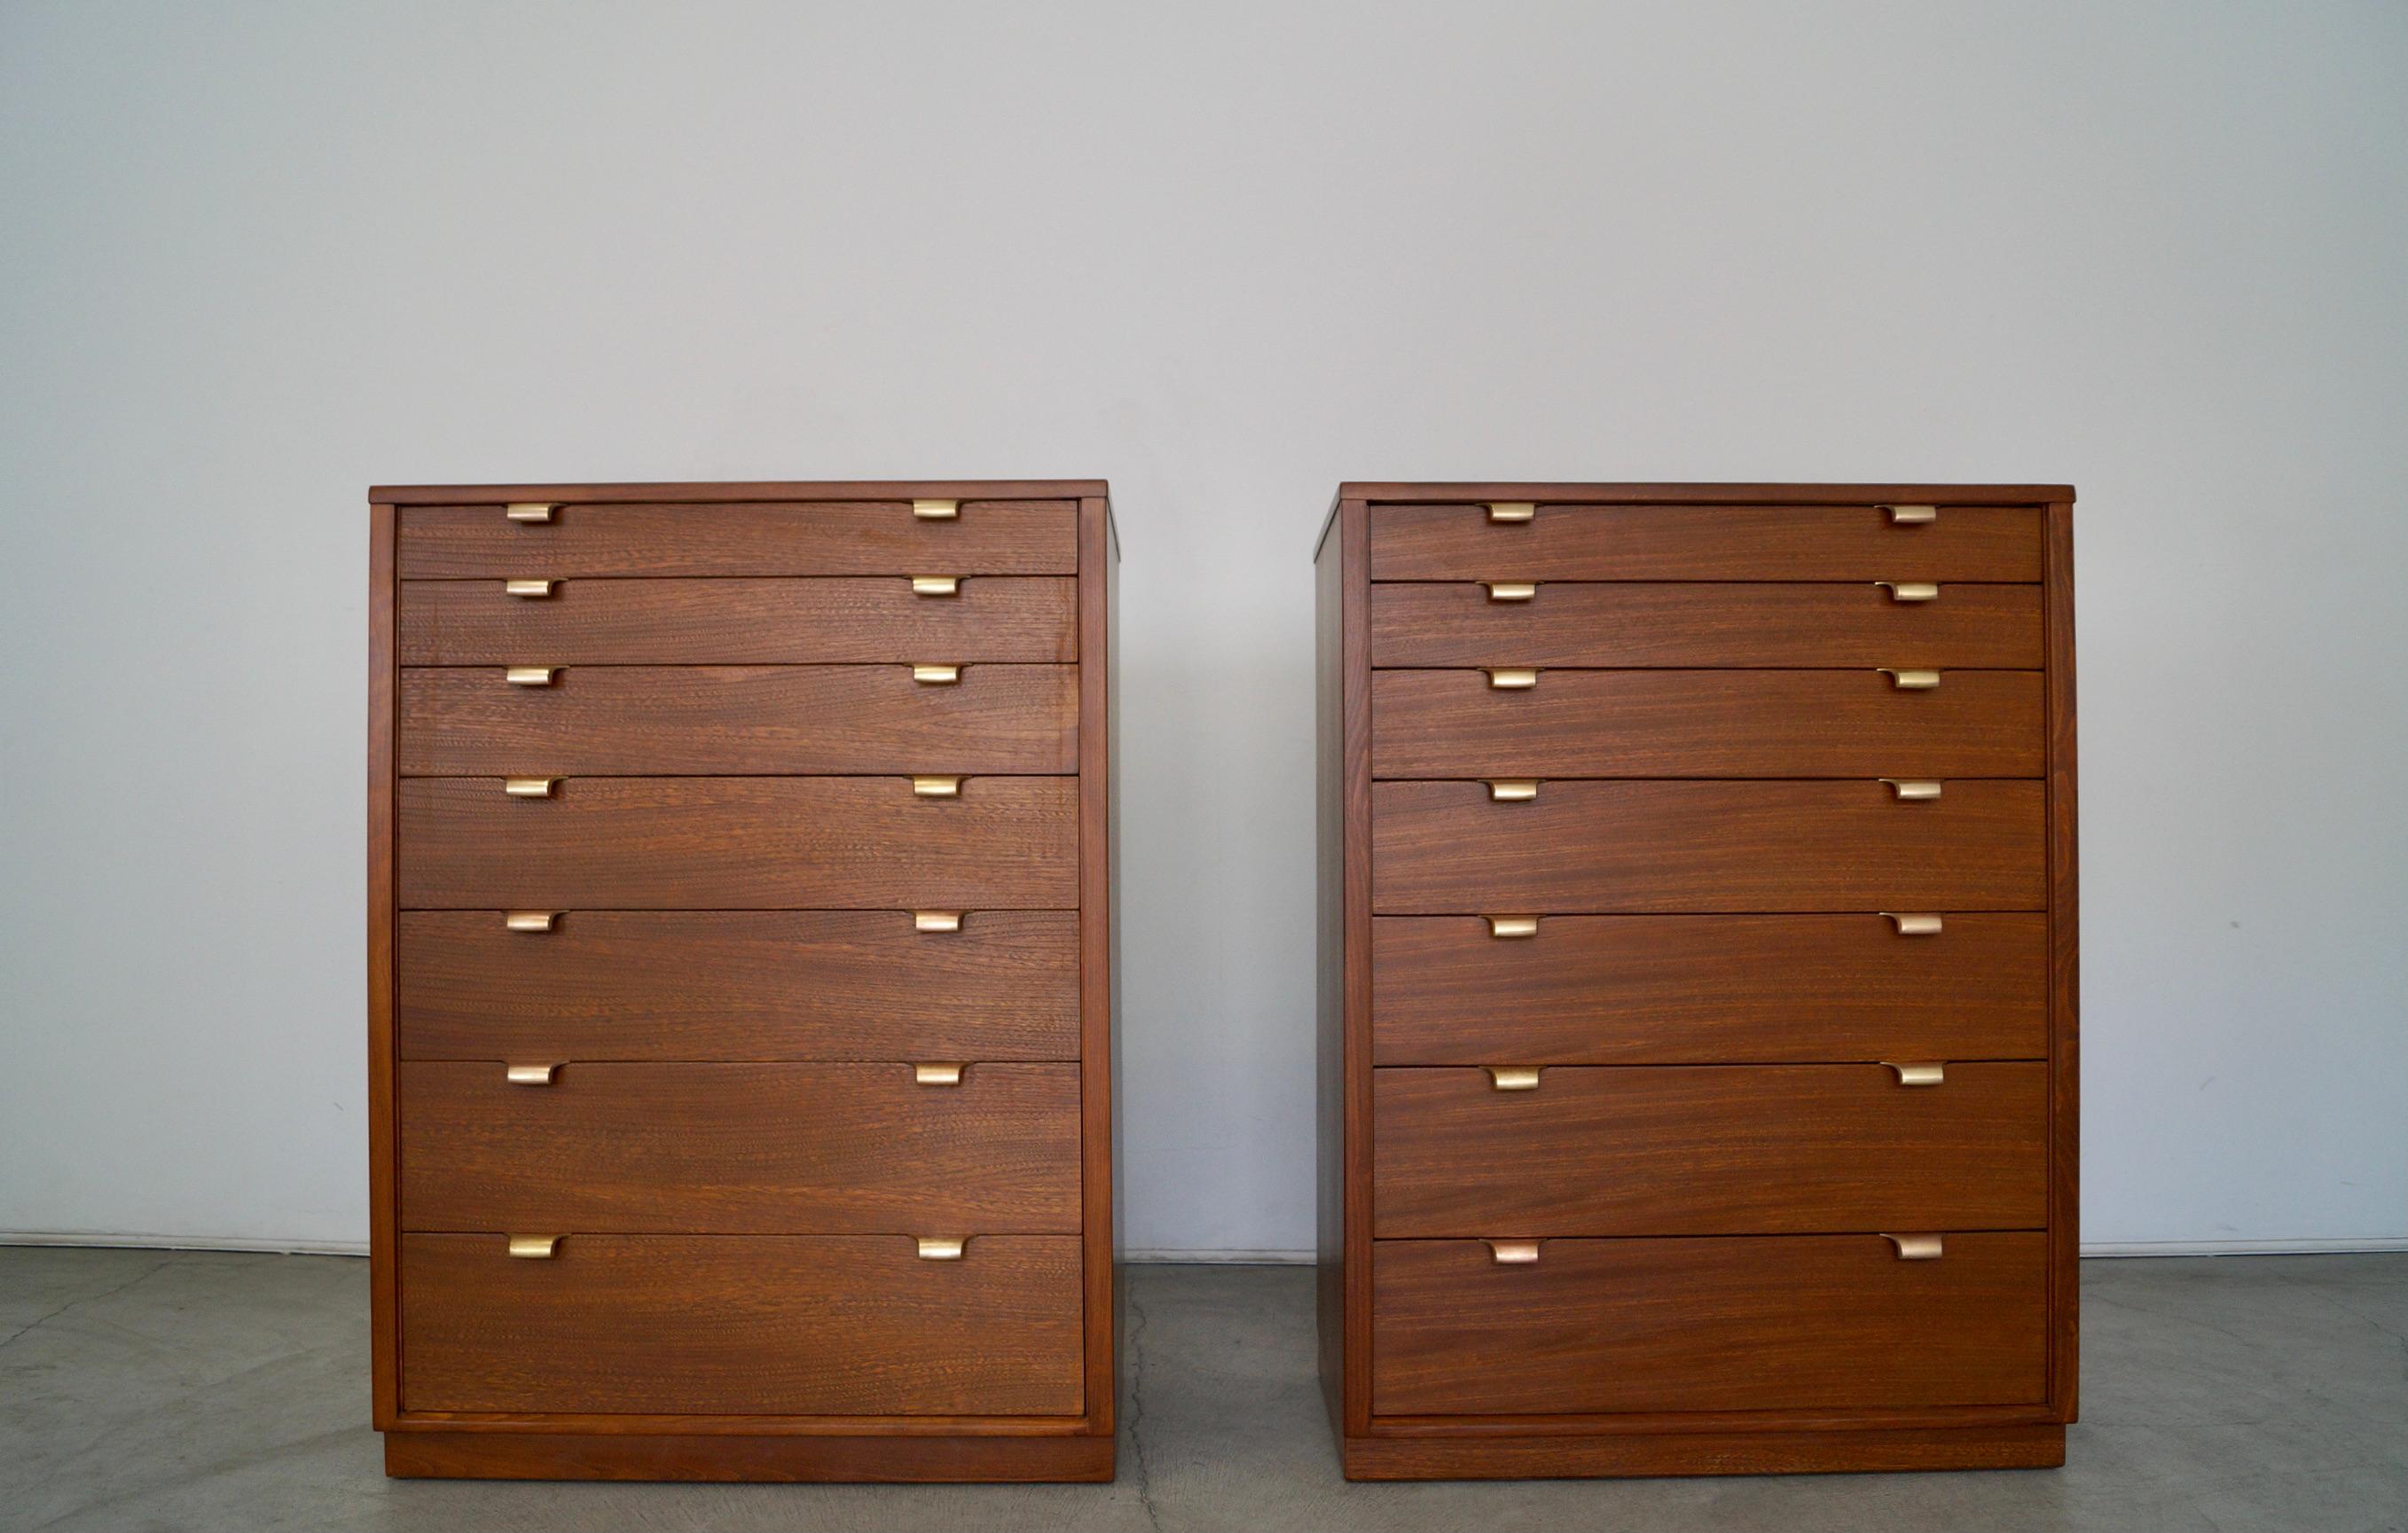 Vintage Mid-Century Modern pair of dressers for sale. These were manufactured in the 1947, and designed by Edward Wormley for Drexel. They're part of the Precedent series. They have been professionally refinished in walnut, and are beautifully